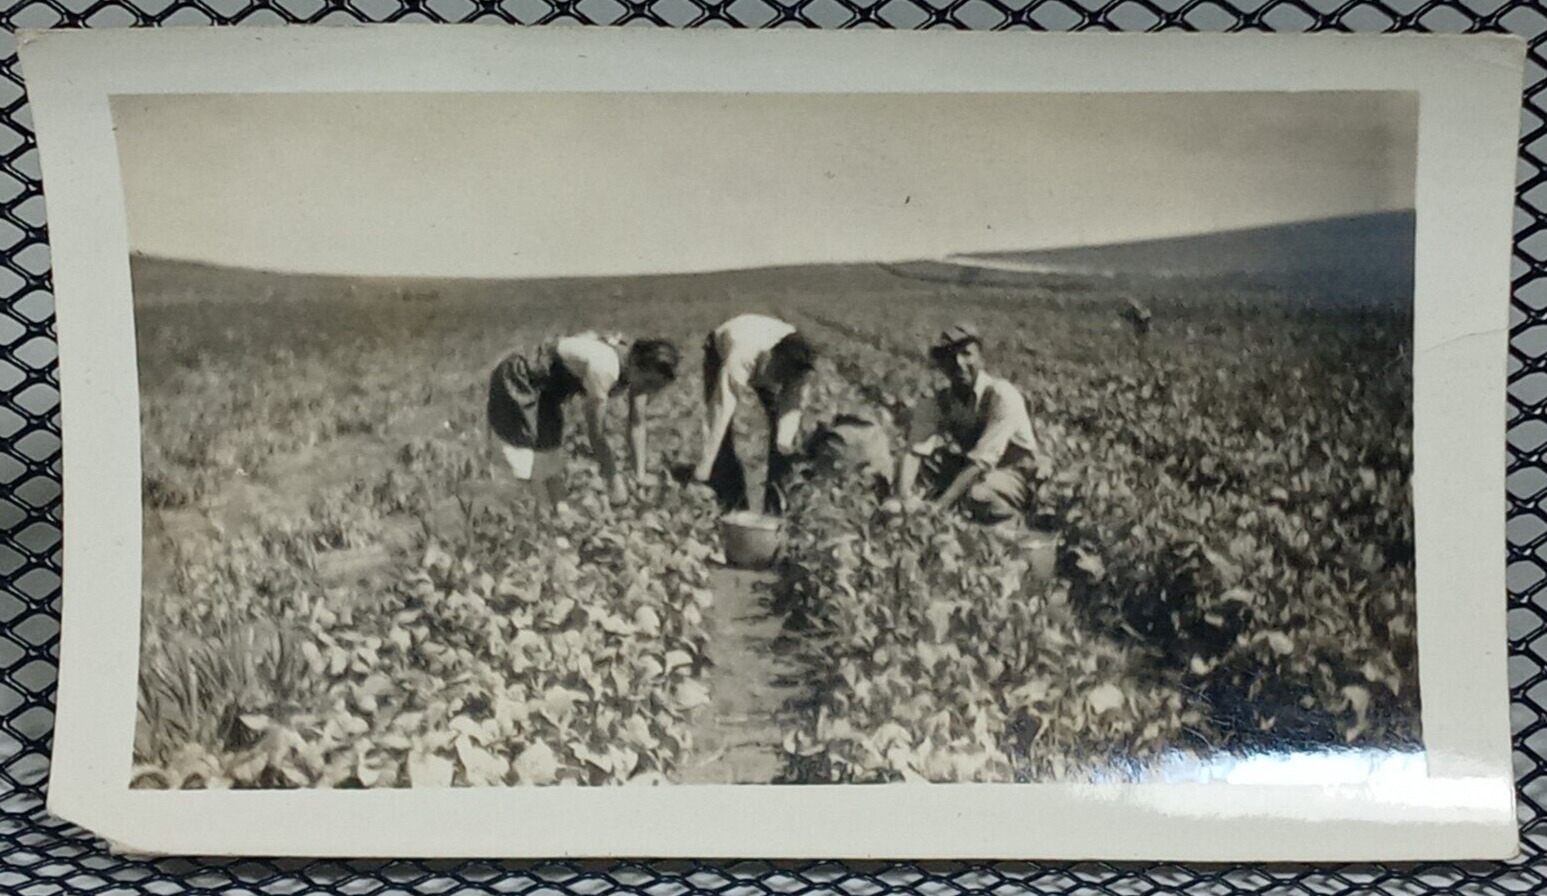 1940 Large Farming Garden Happy Working Reaping Field Vintage Antique Photo